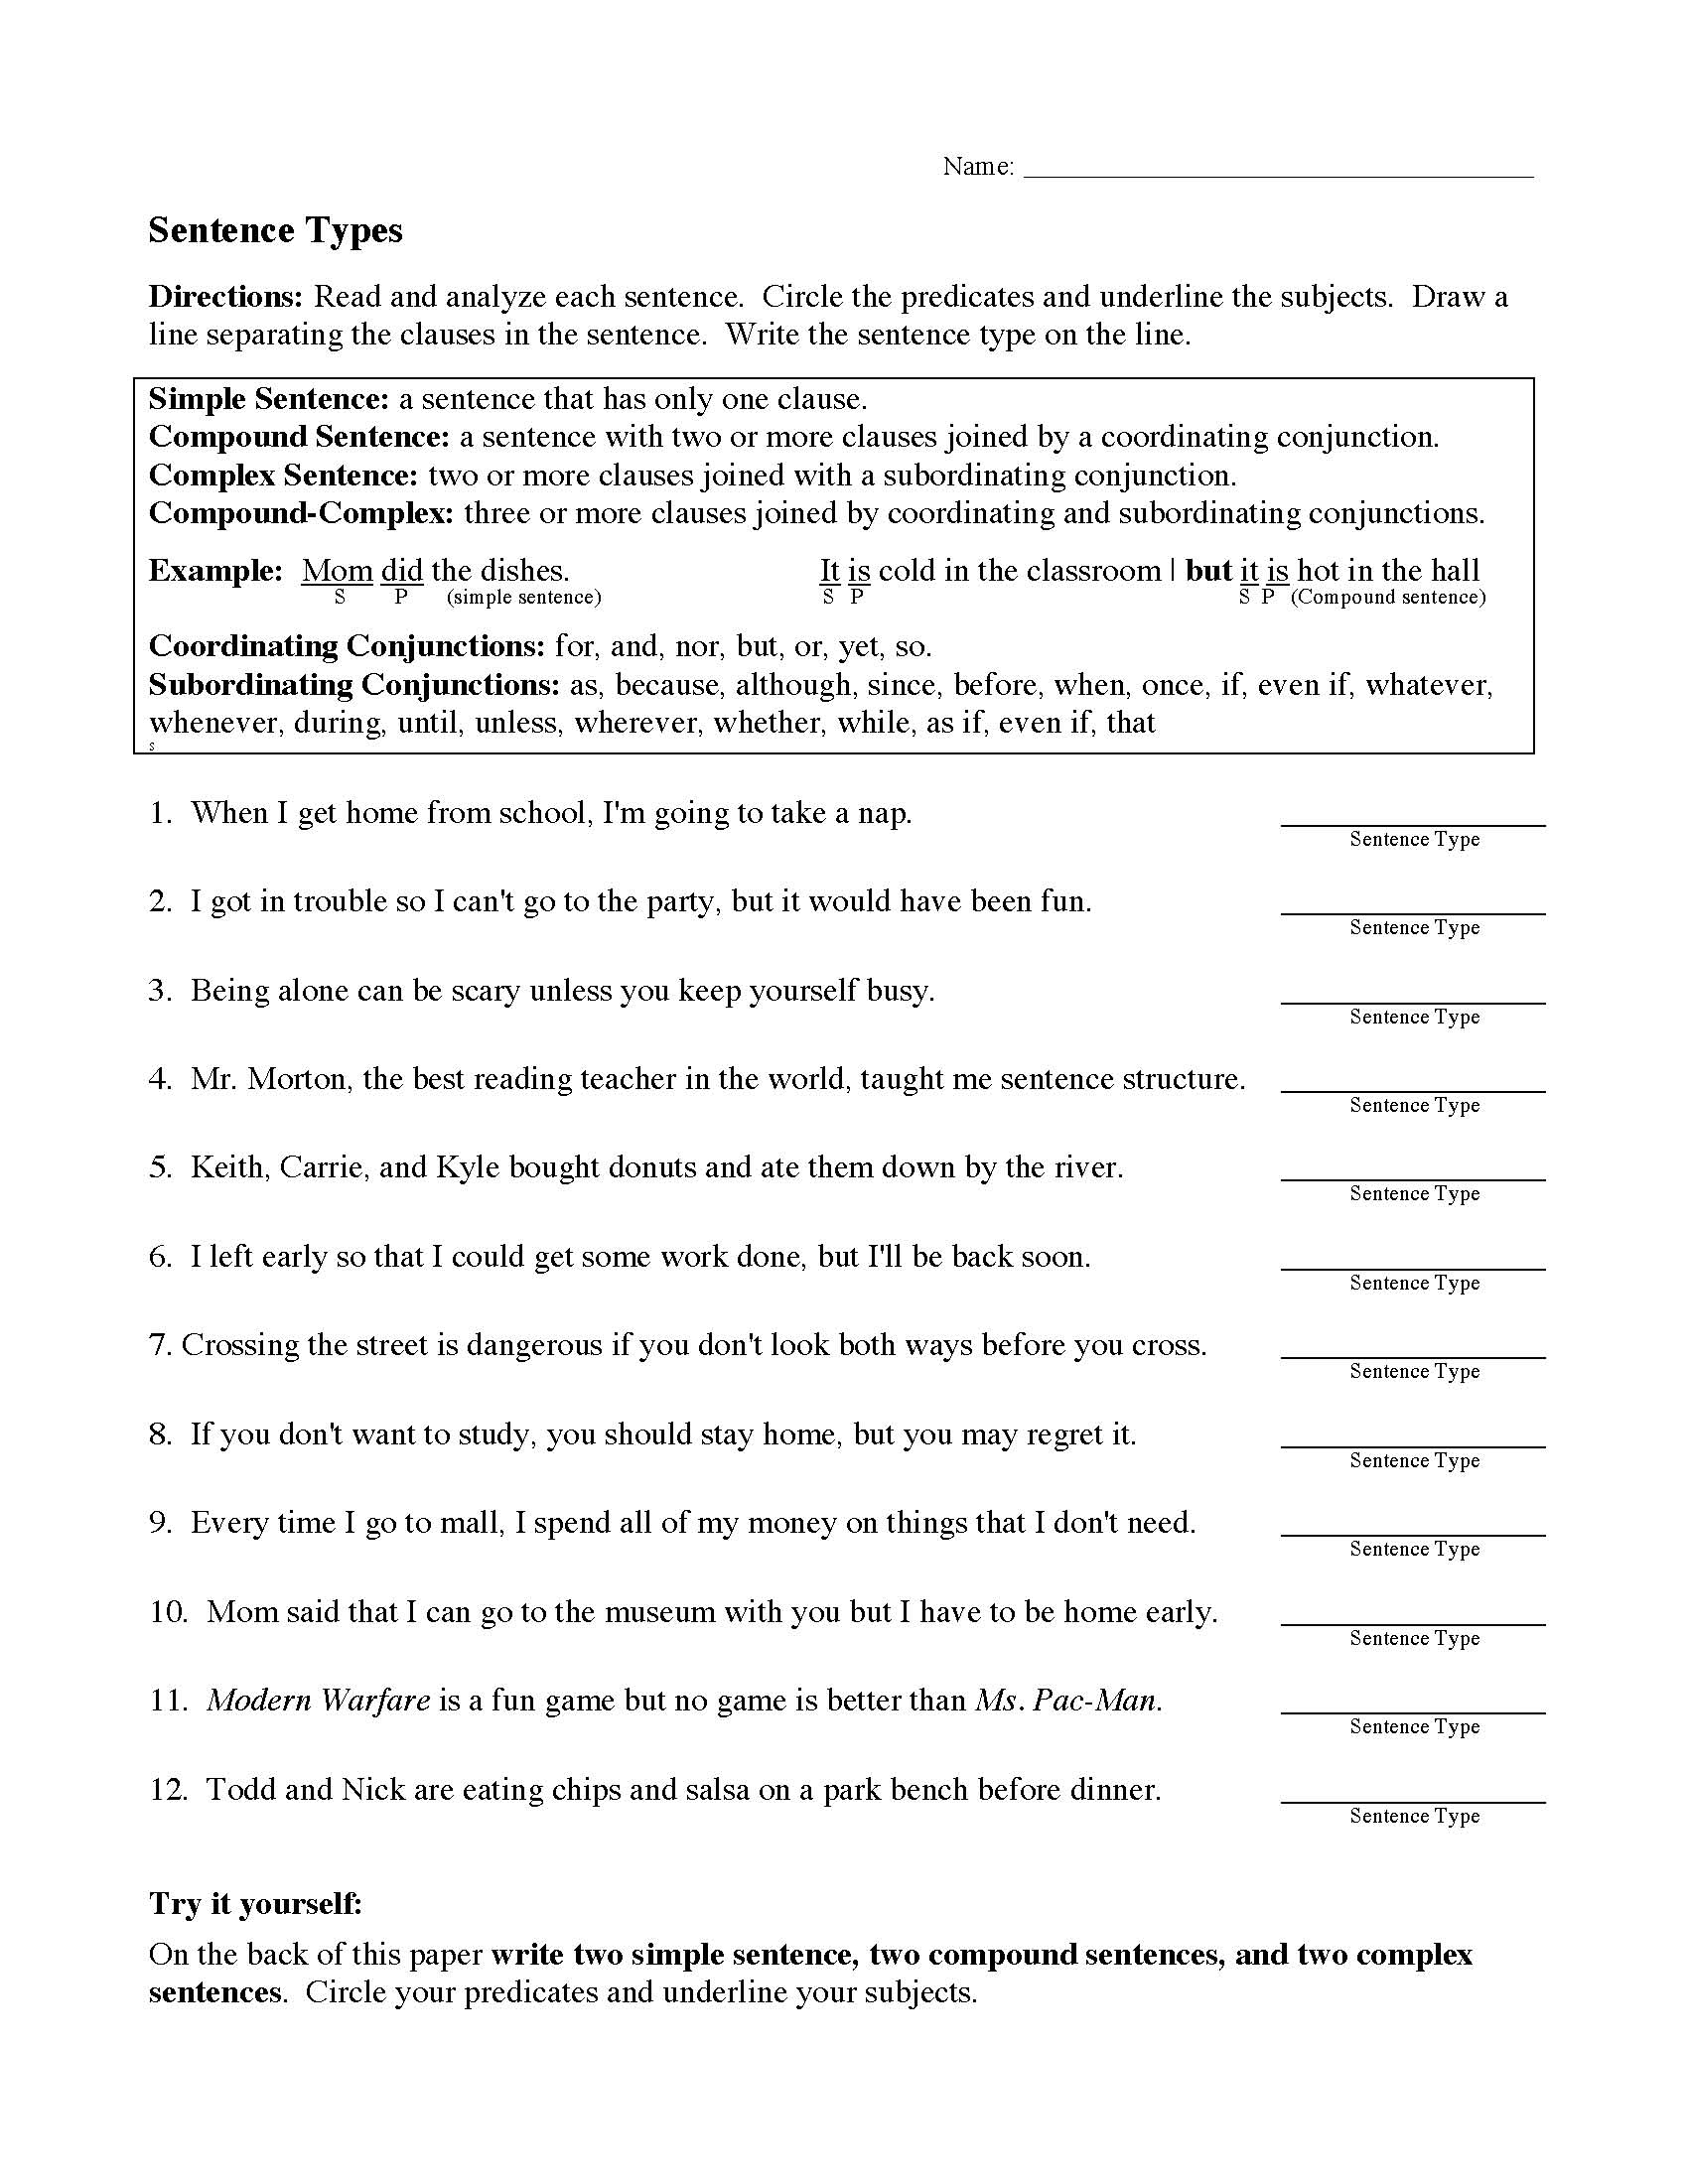 types-of-sentence-structure-worksheet-hot-sex-picture